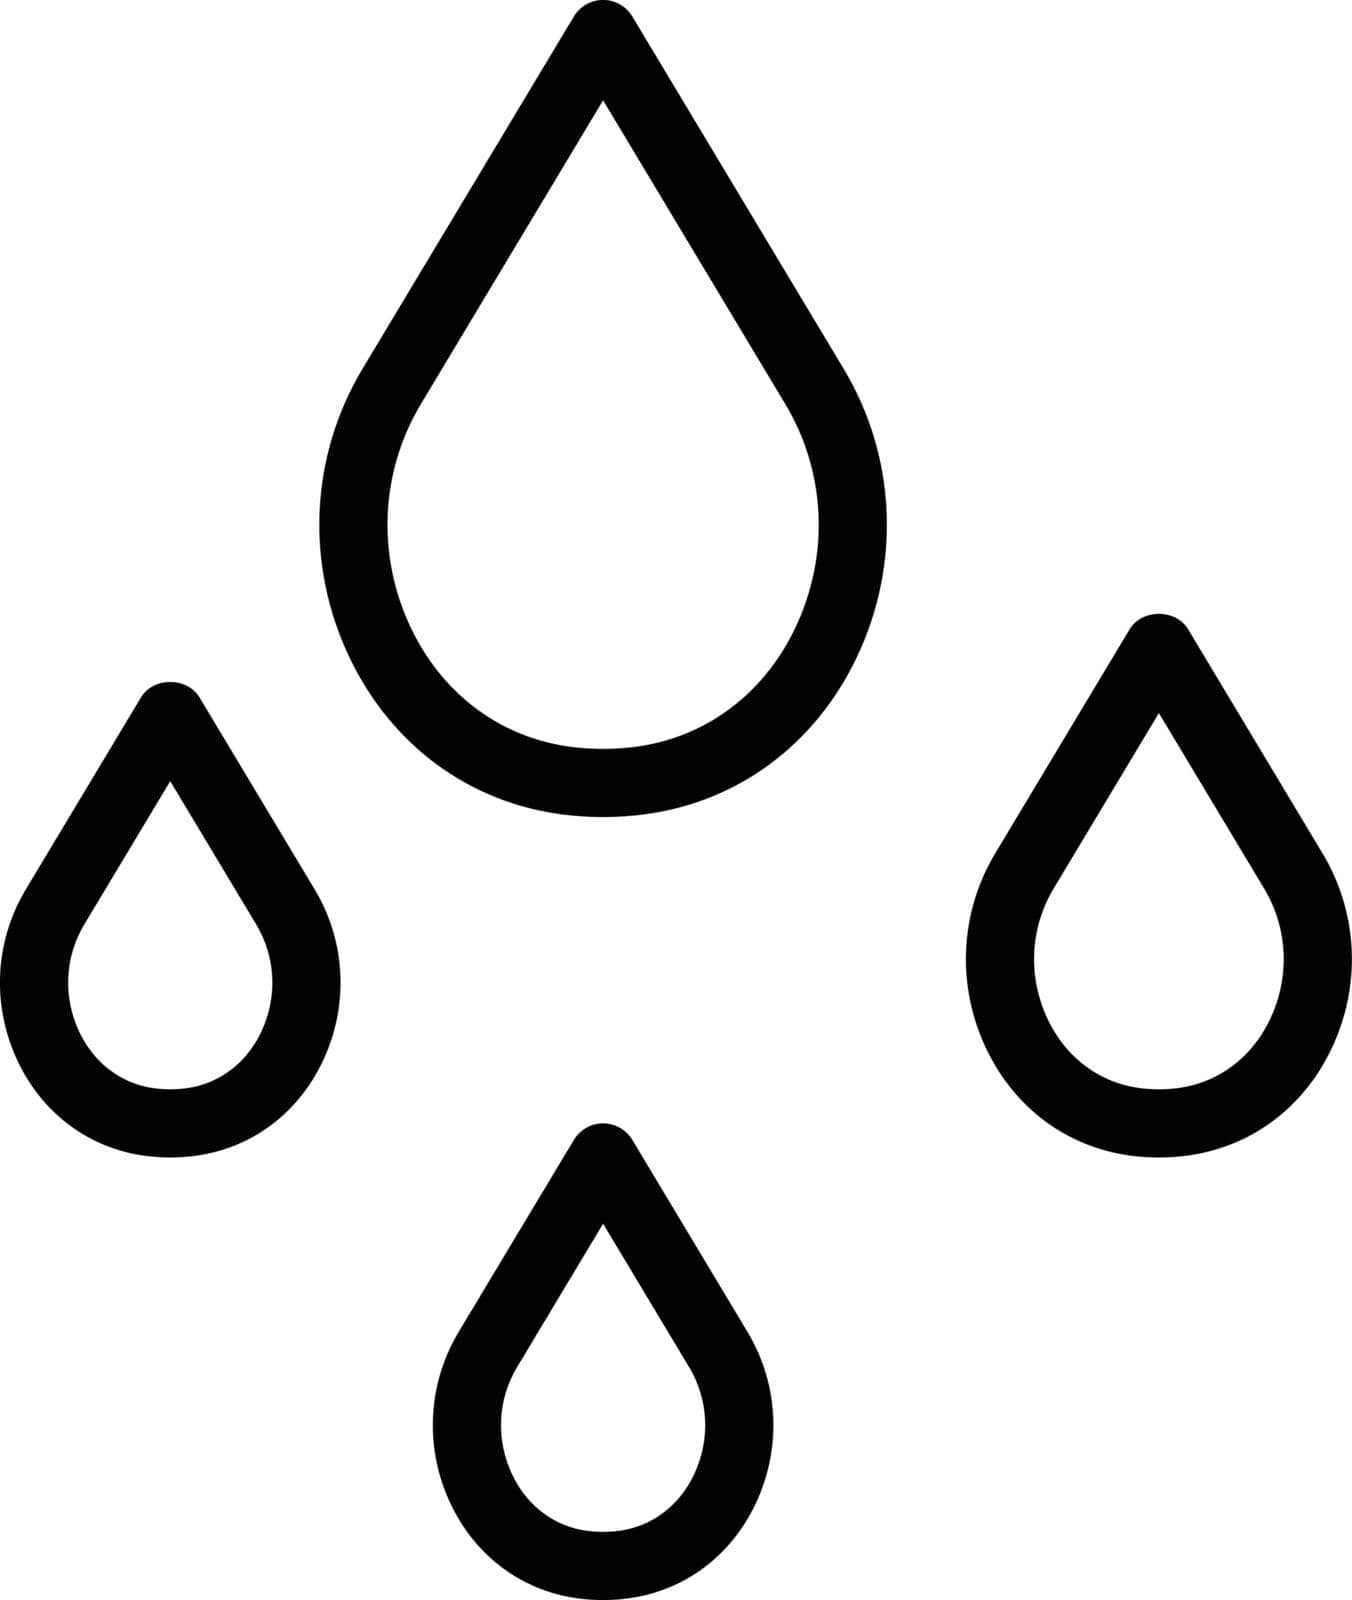 drops Vector illustration on a transparent background. Premium quality symmbols. Thin line vector icons for concept and graphic design.